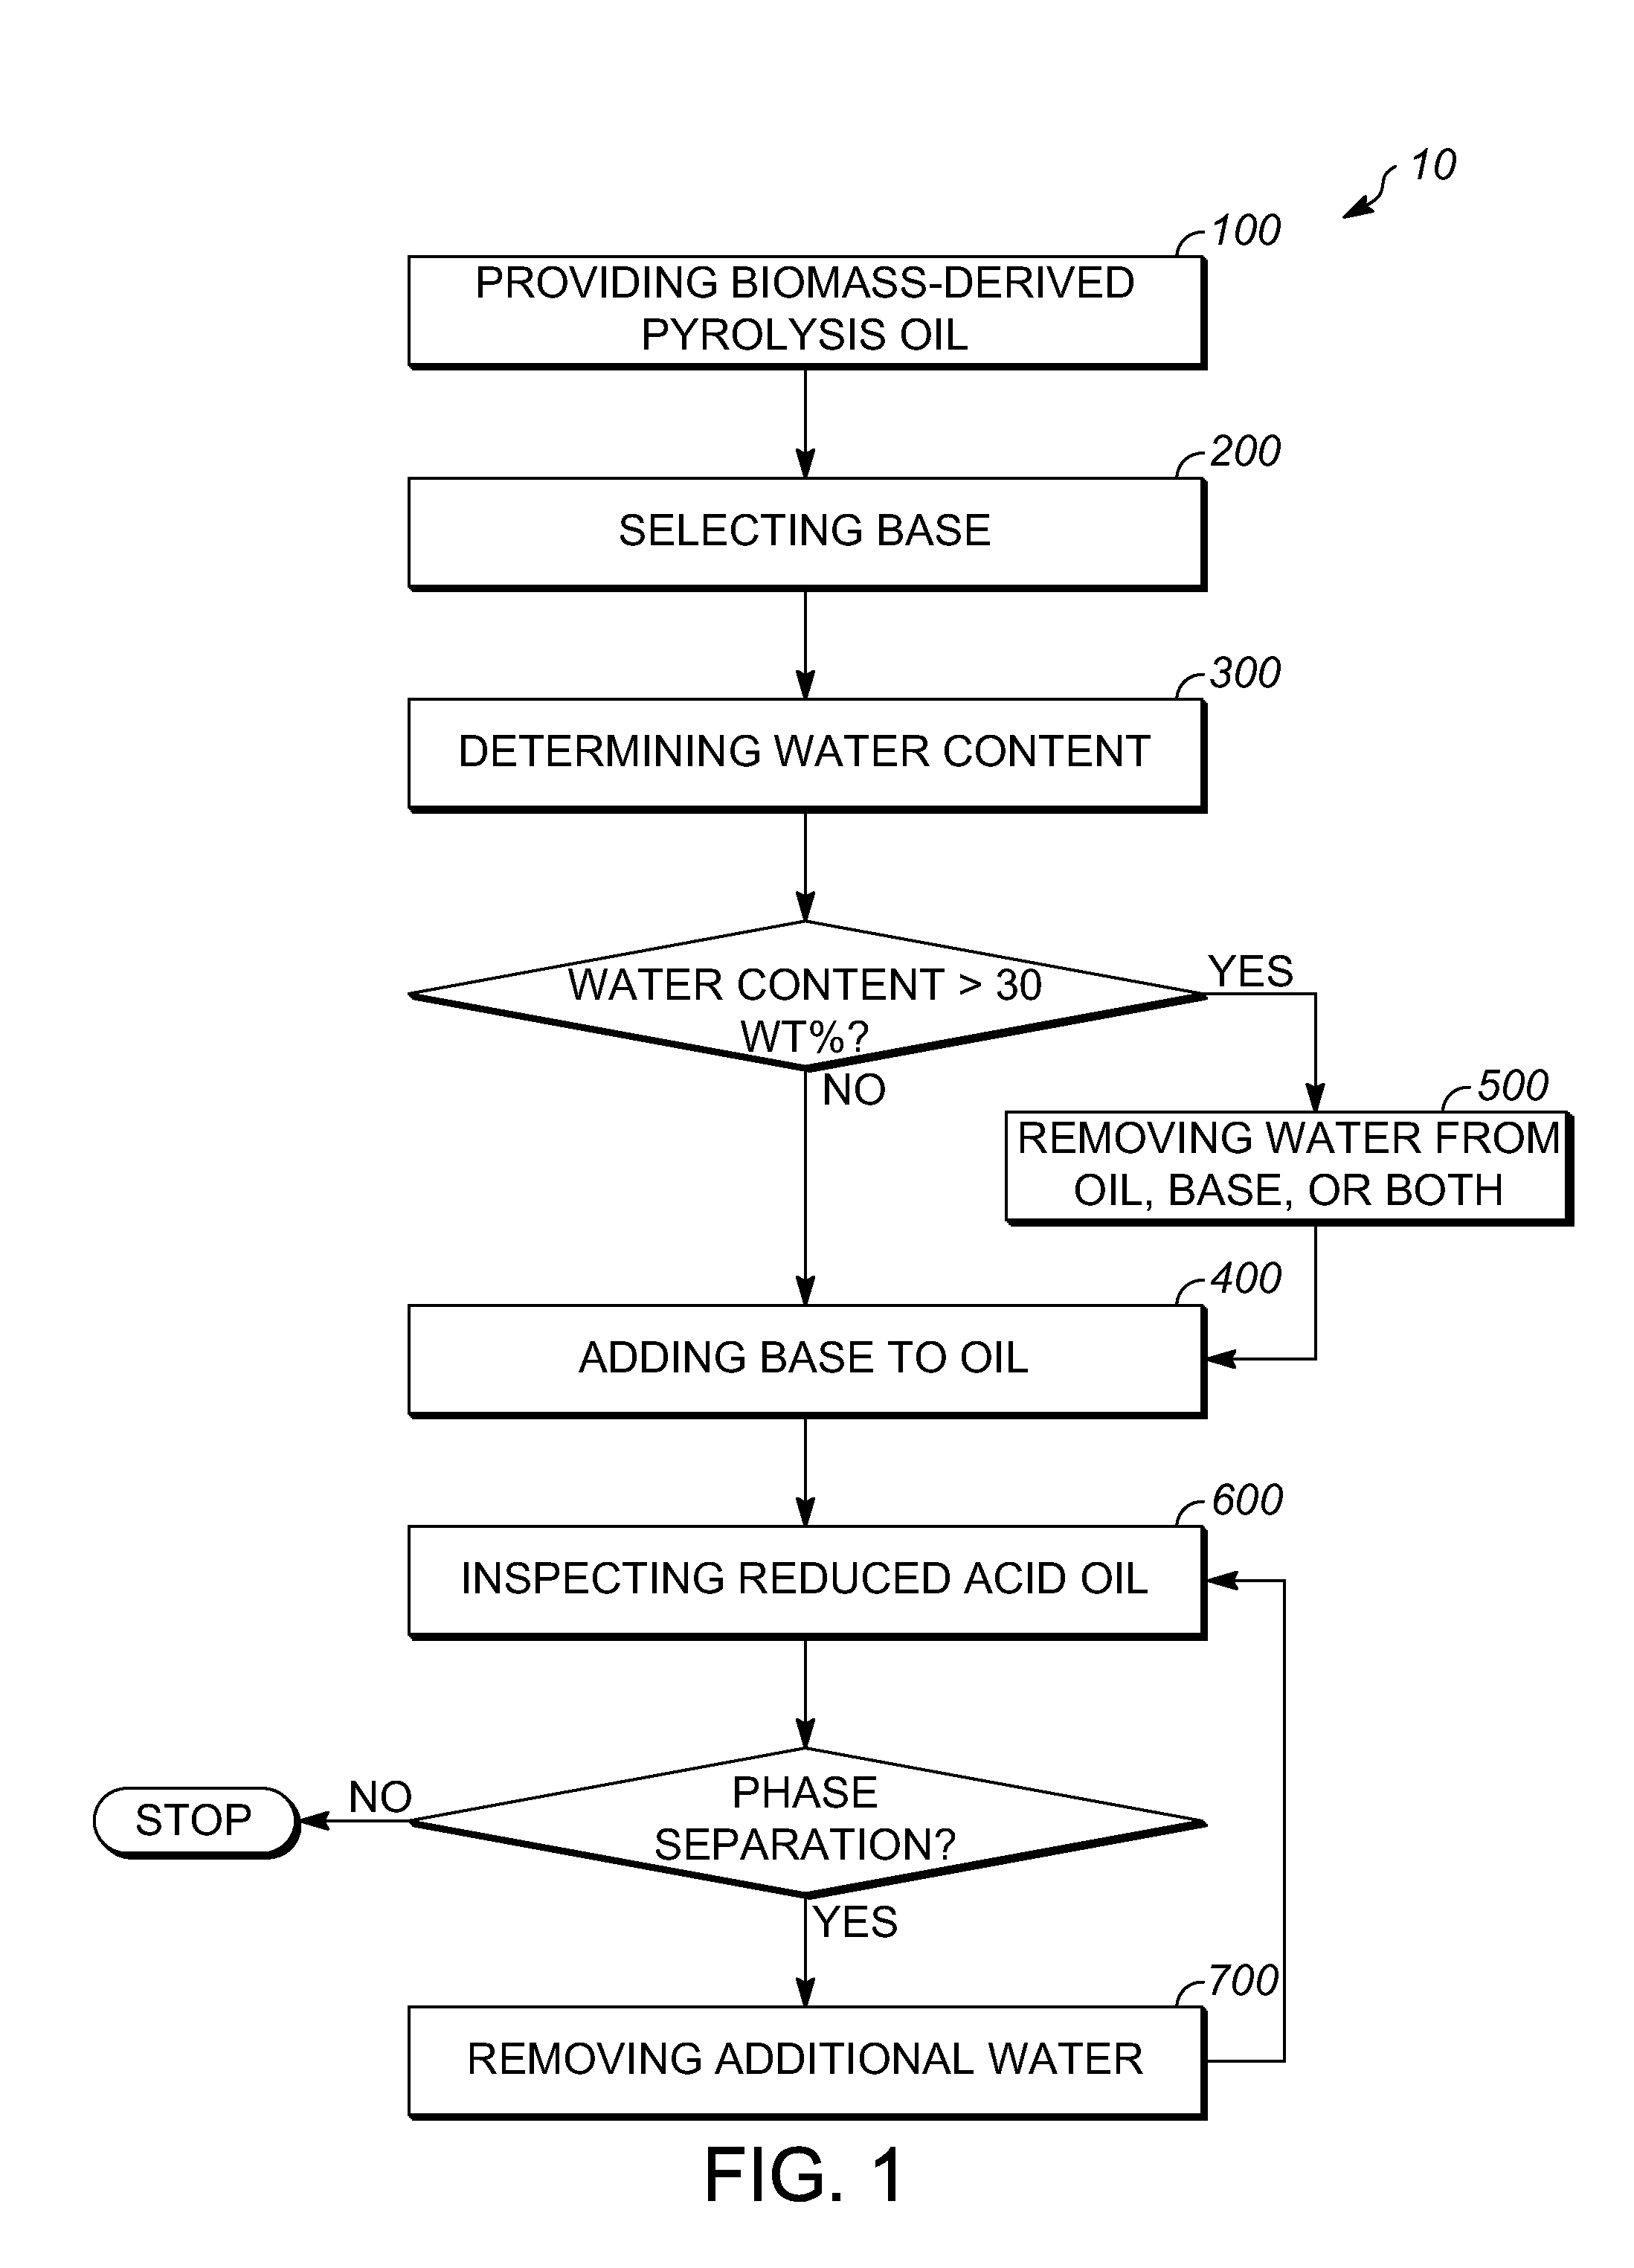 Methods for producing phase stable, reduced acid biomass-derived pyrolysis oils